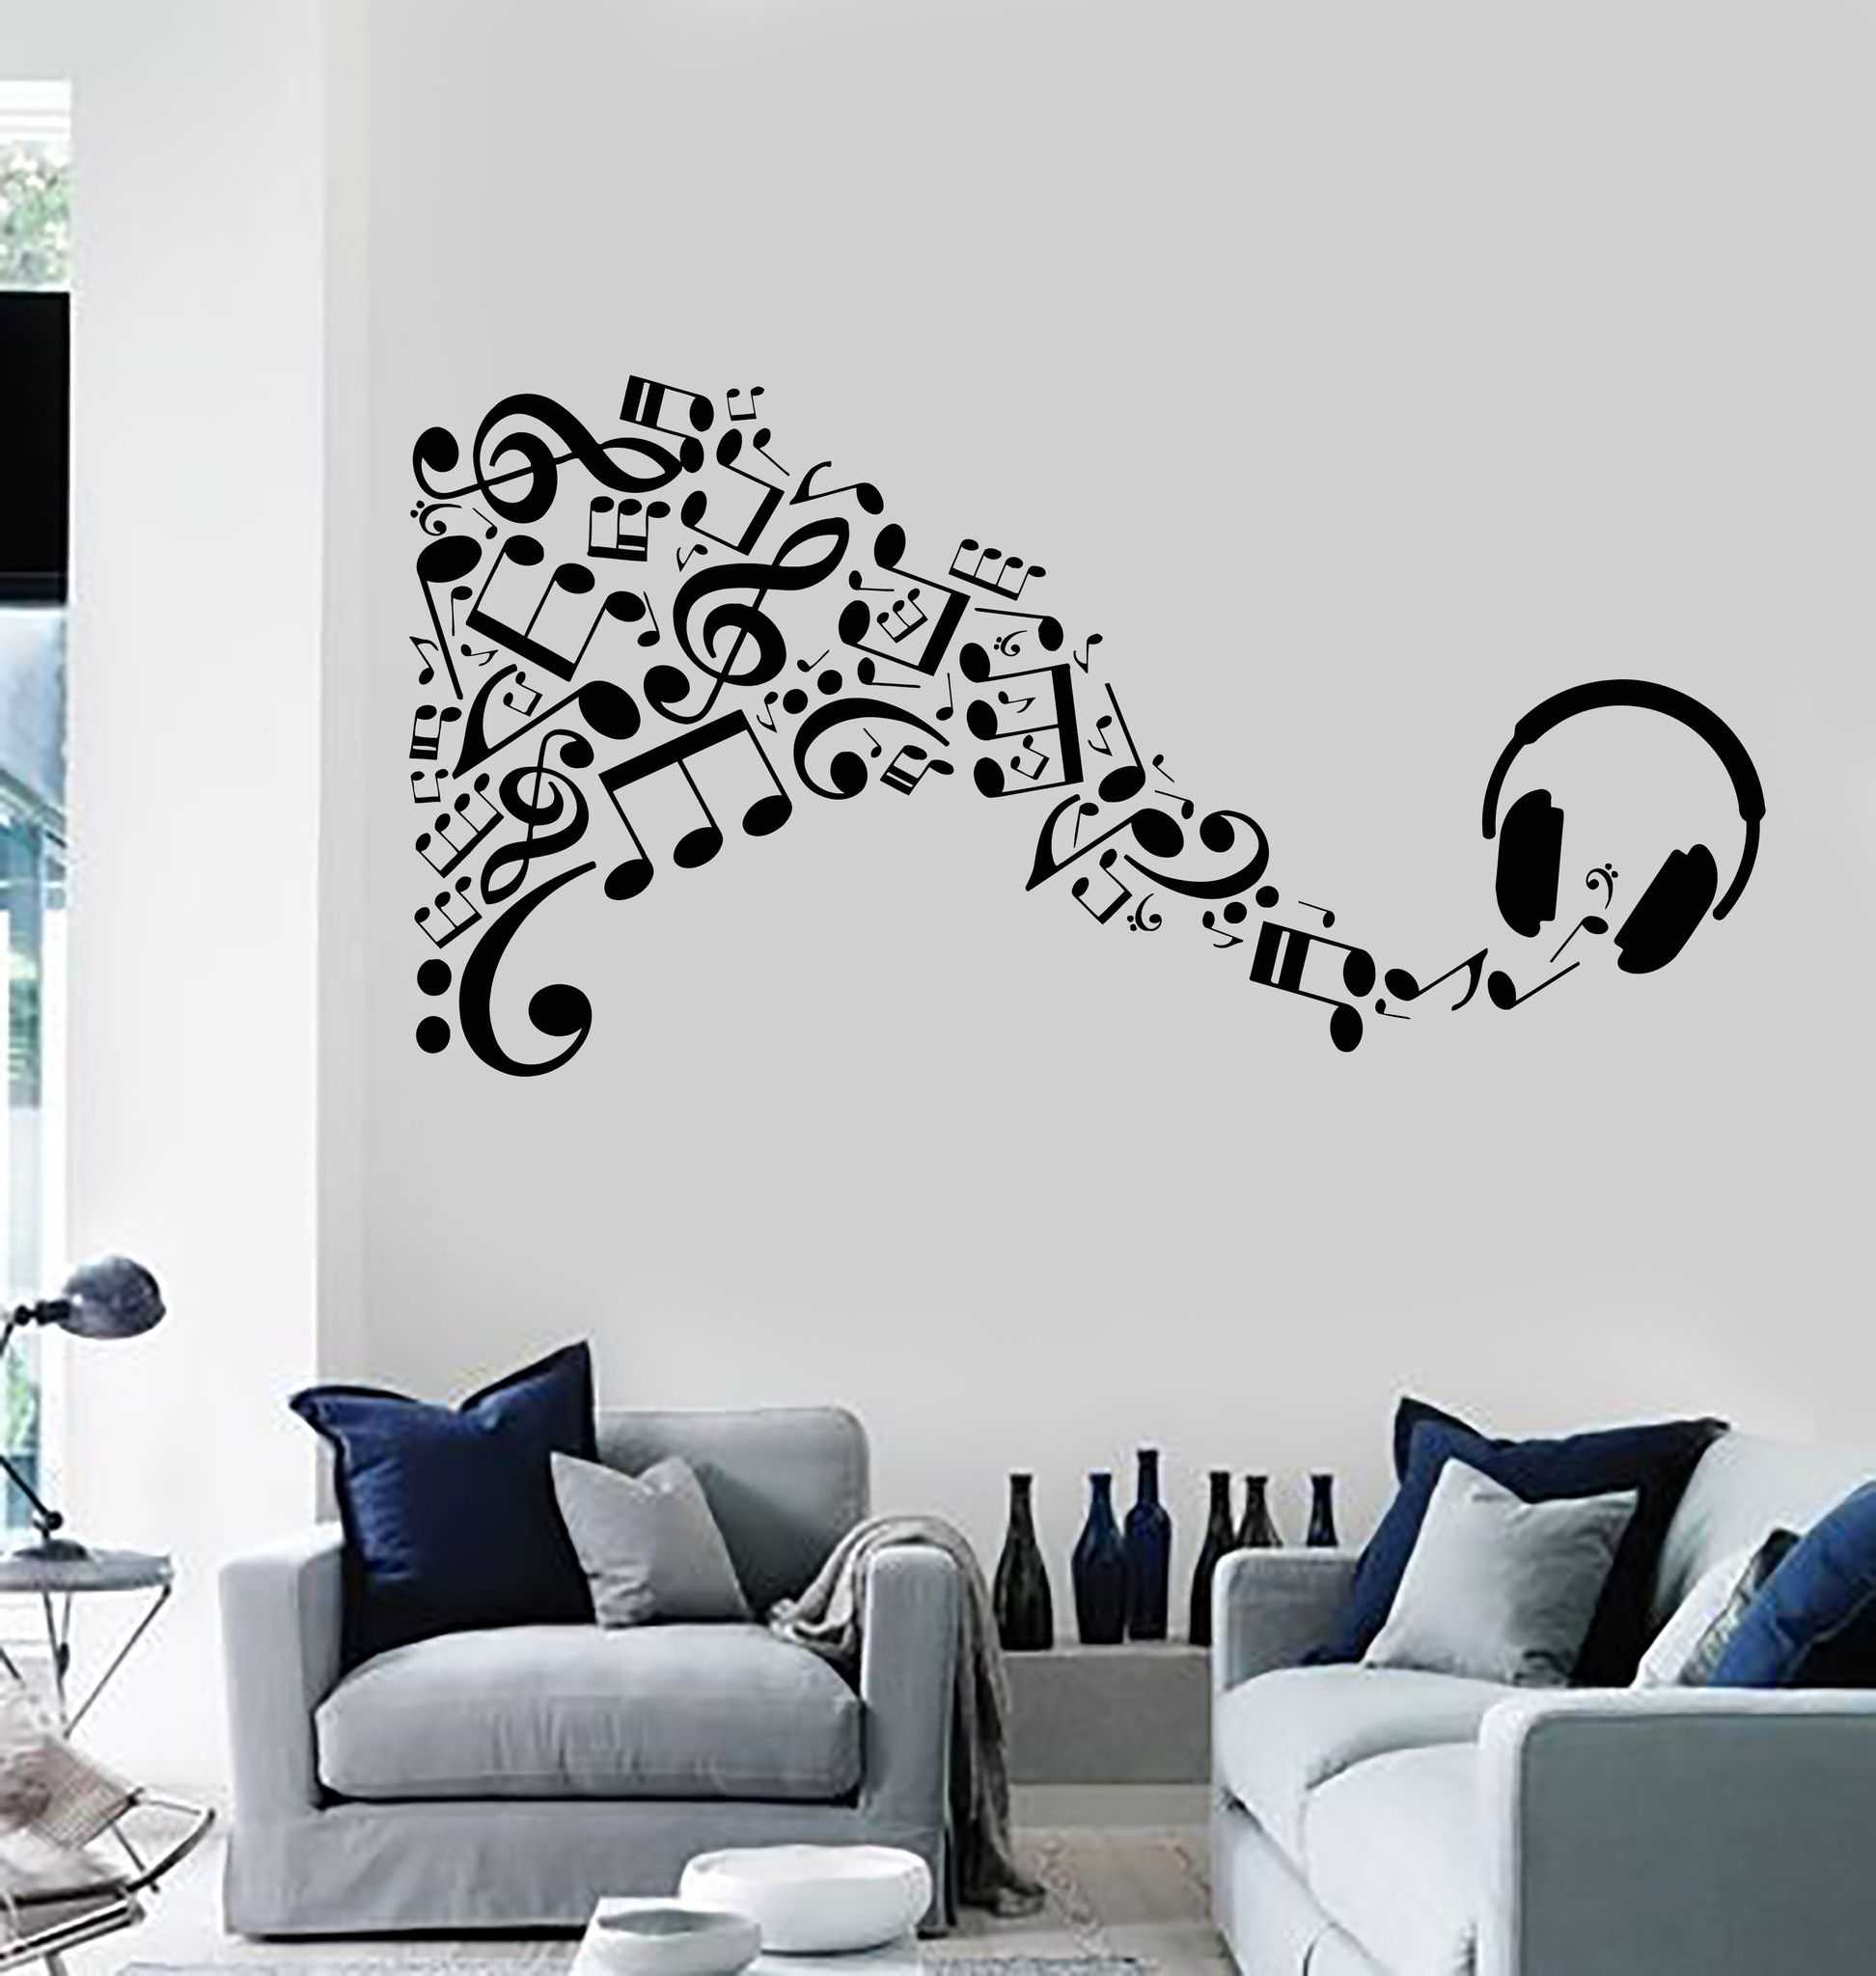 Wall Drawings Art At Paintingvalley Com Explore Collection Of Wall Drawings Art